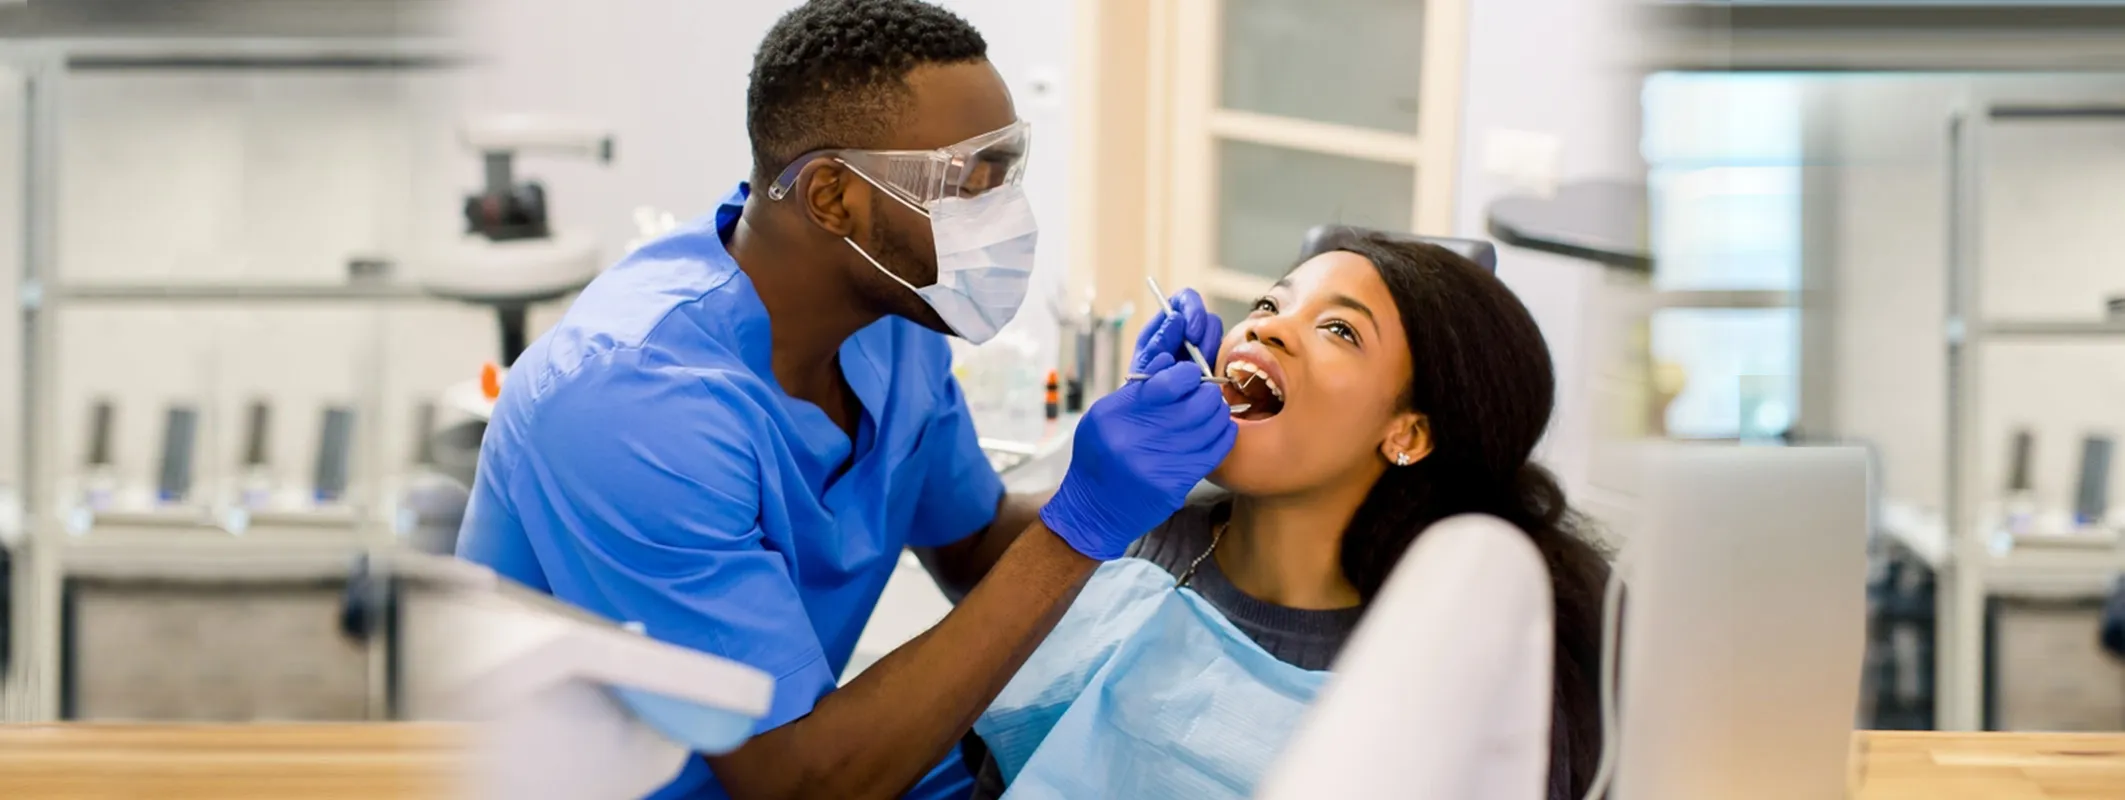 All locations of Dentists Practice